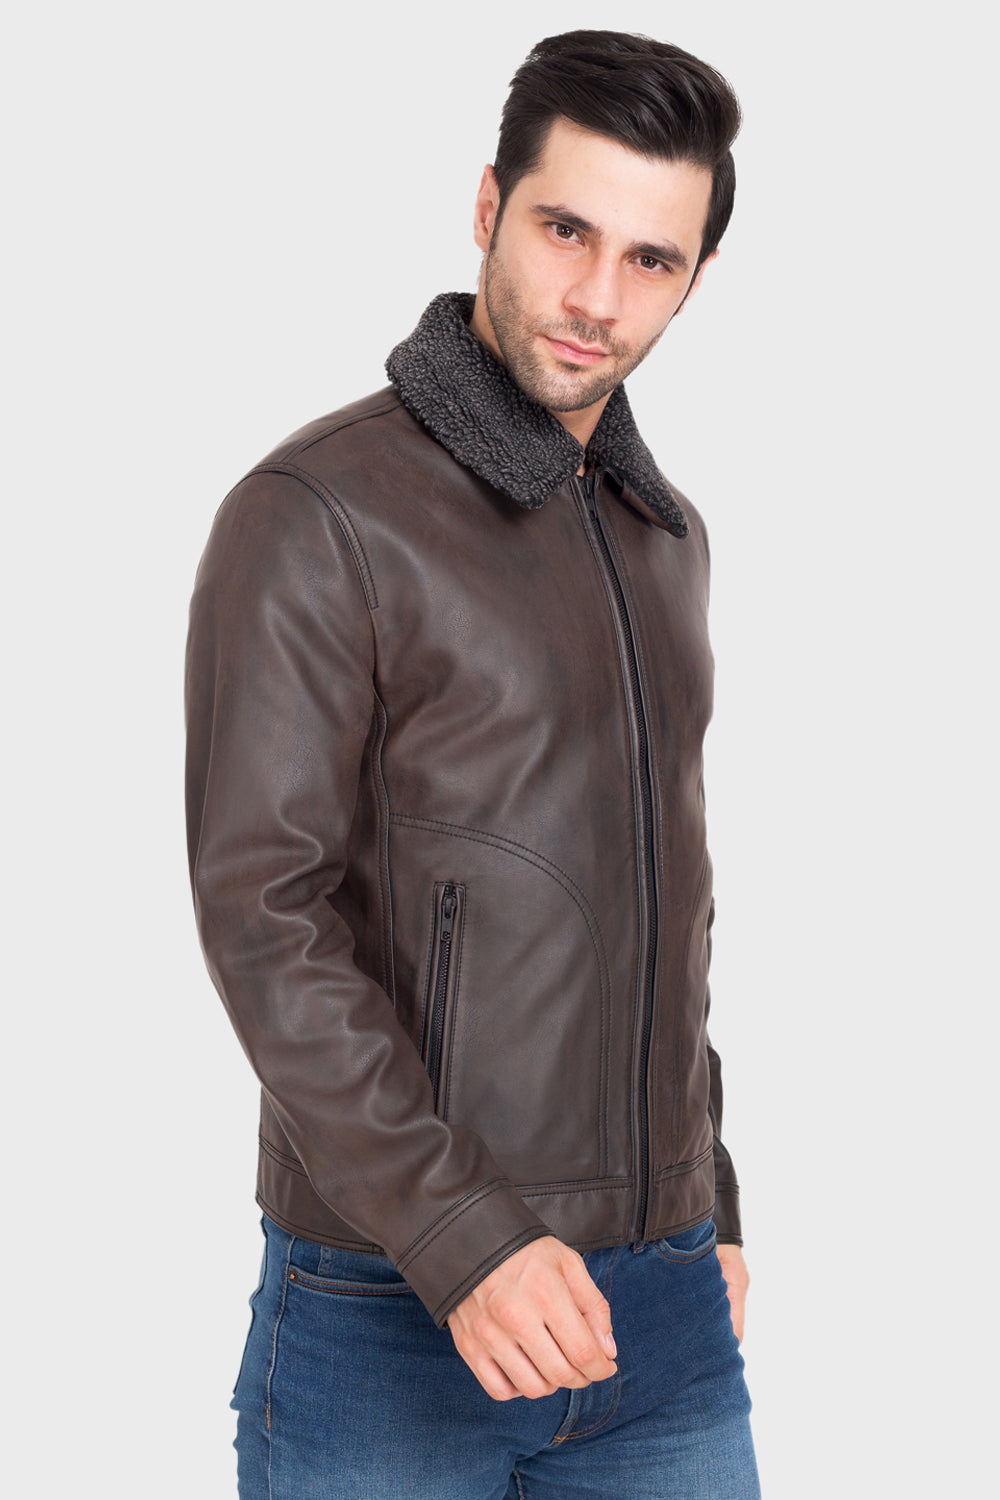 Justanned Warm Brown Leather Jacket